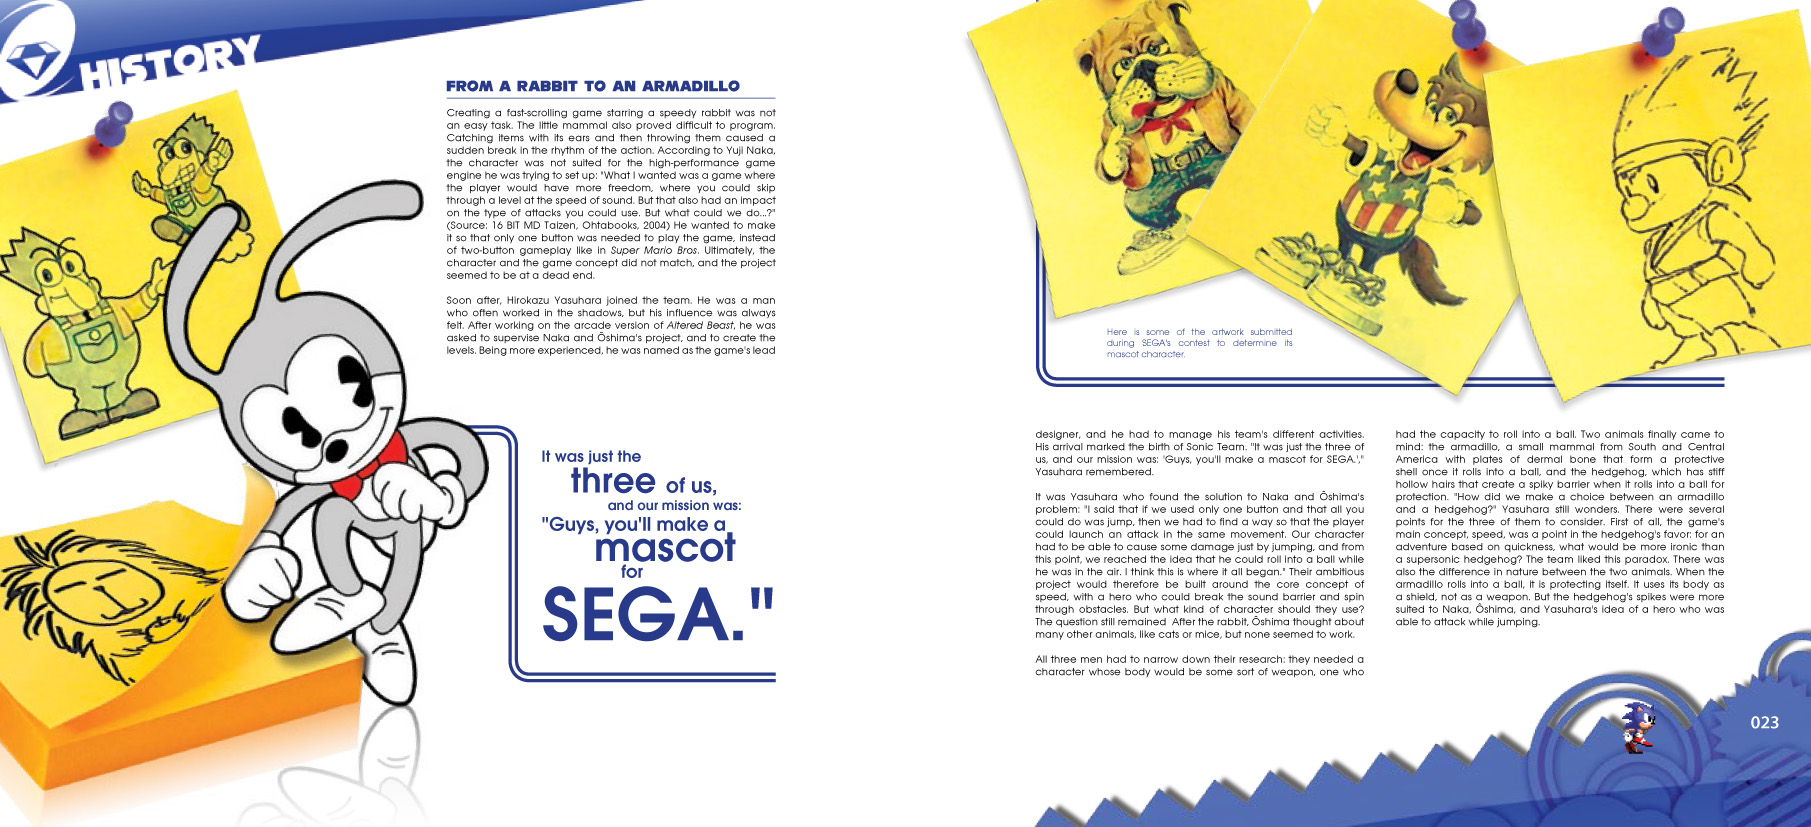 The History of Sonic the Hedgehog by Pétronille, Marc